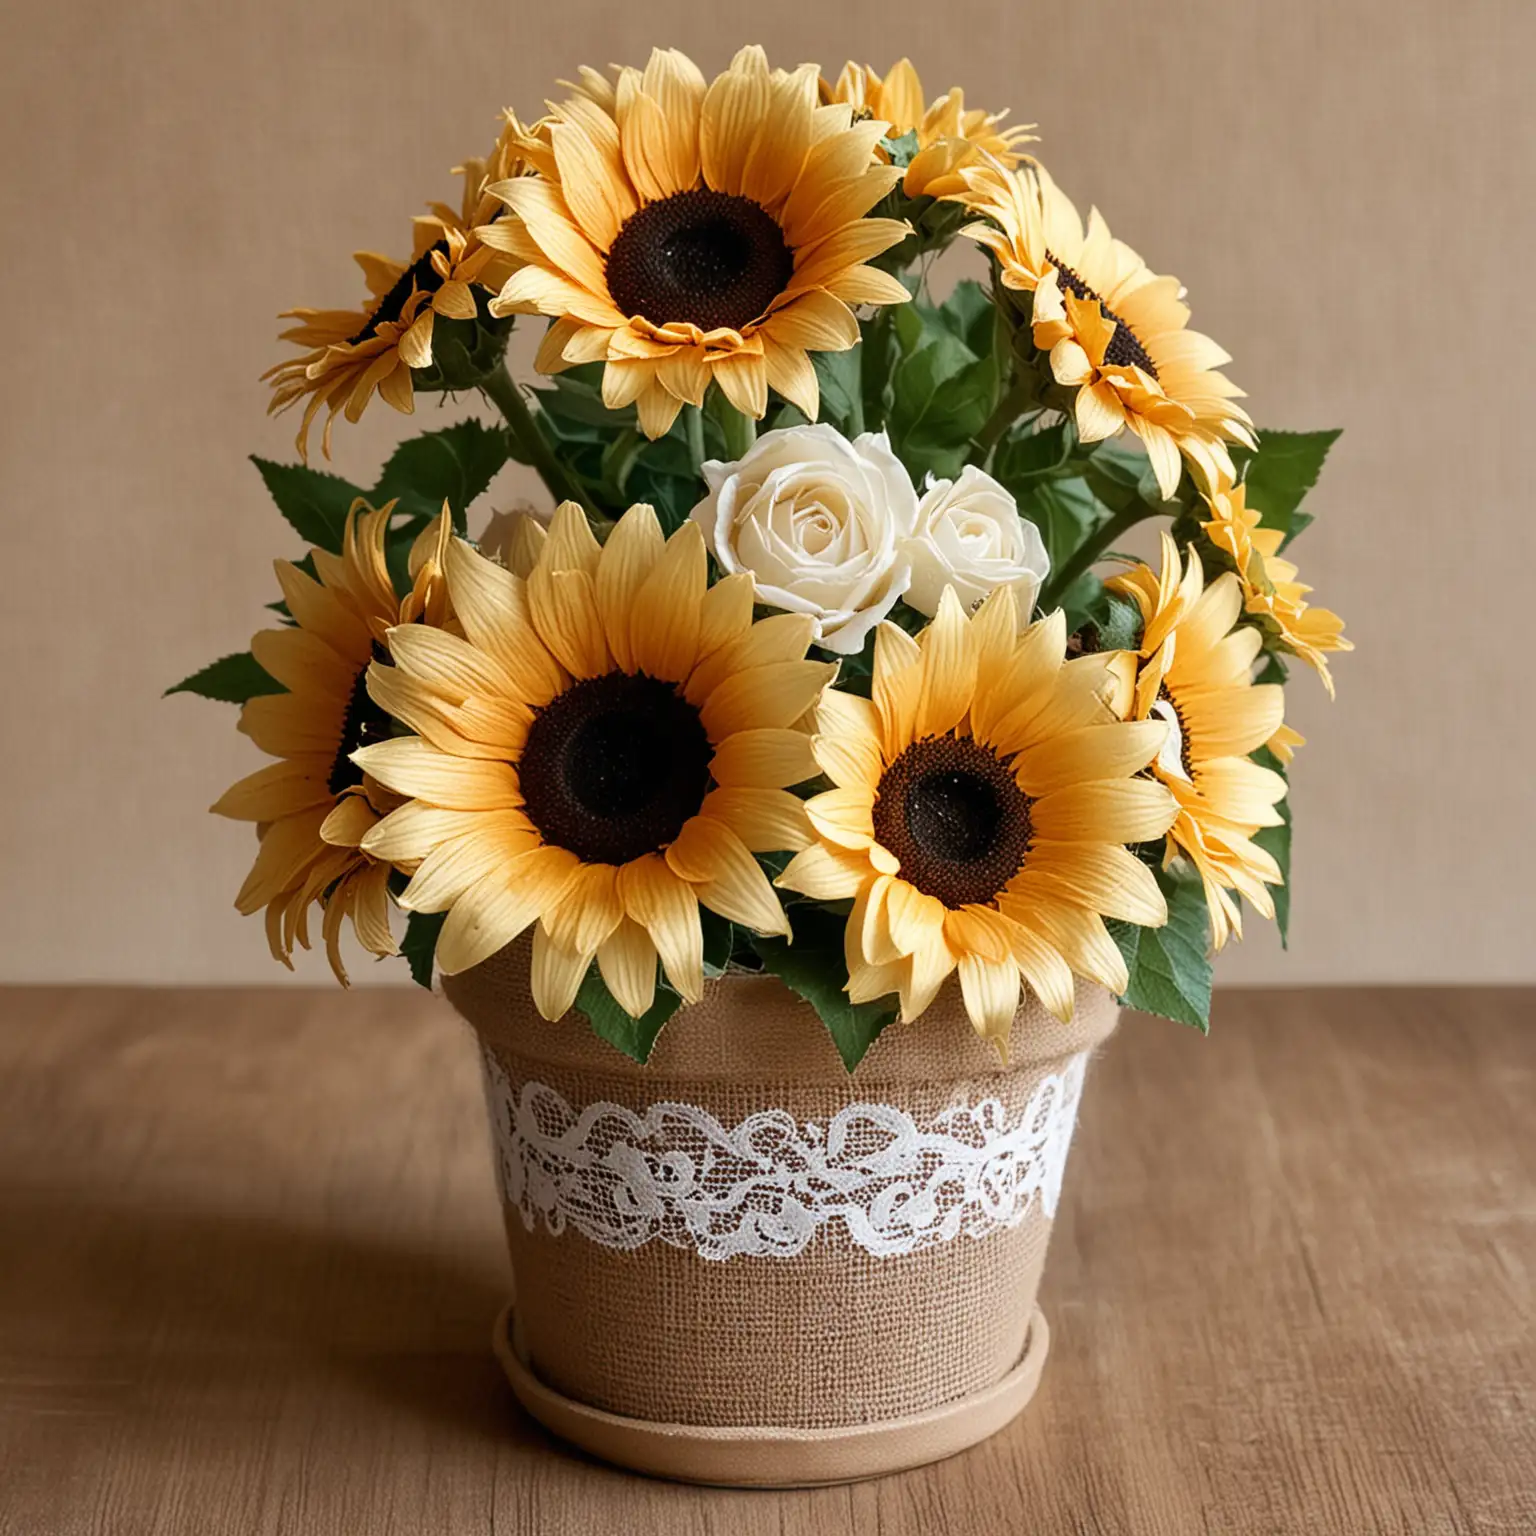 a rustic wedding centerpiece made of a small rustic, worn terra cotta pot that is painted ivory and decorated with burlap and lace and holds sunflowers and ivory roses